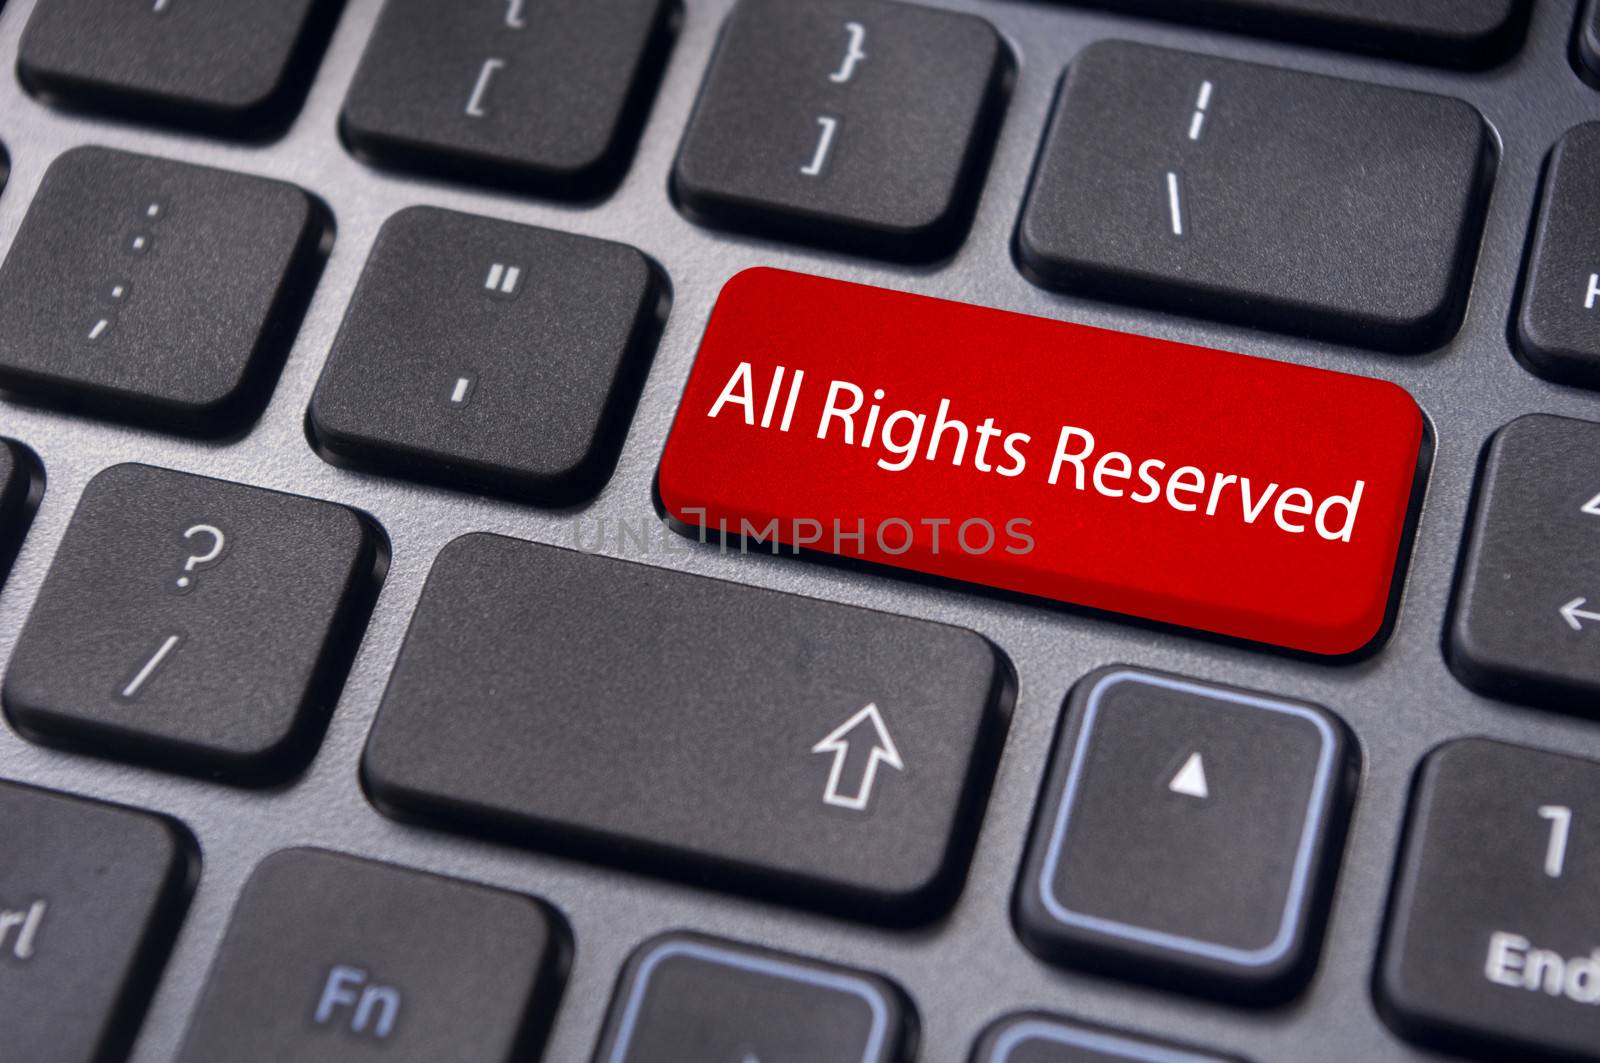 an All Rights Reserved message on keyboard to illustrate the concepts.